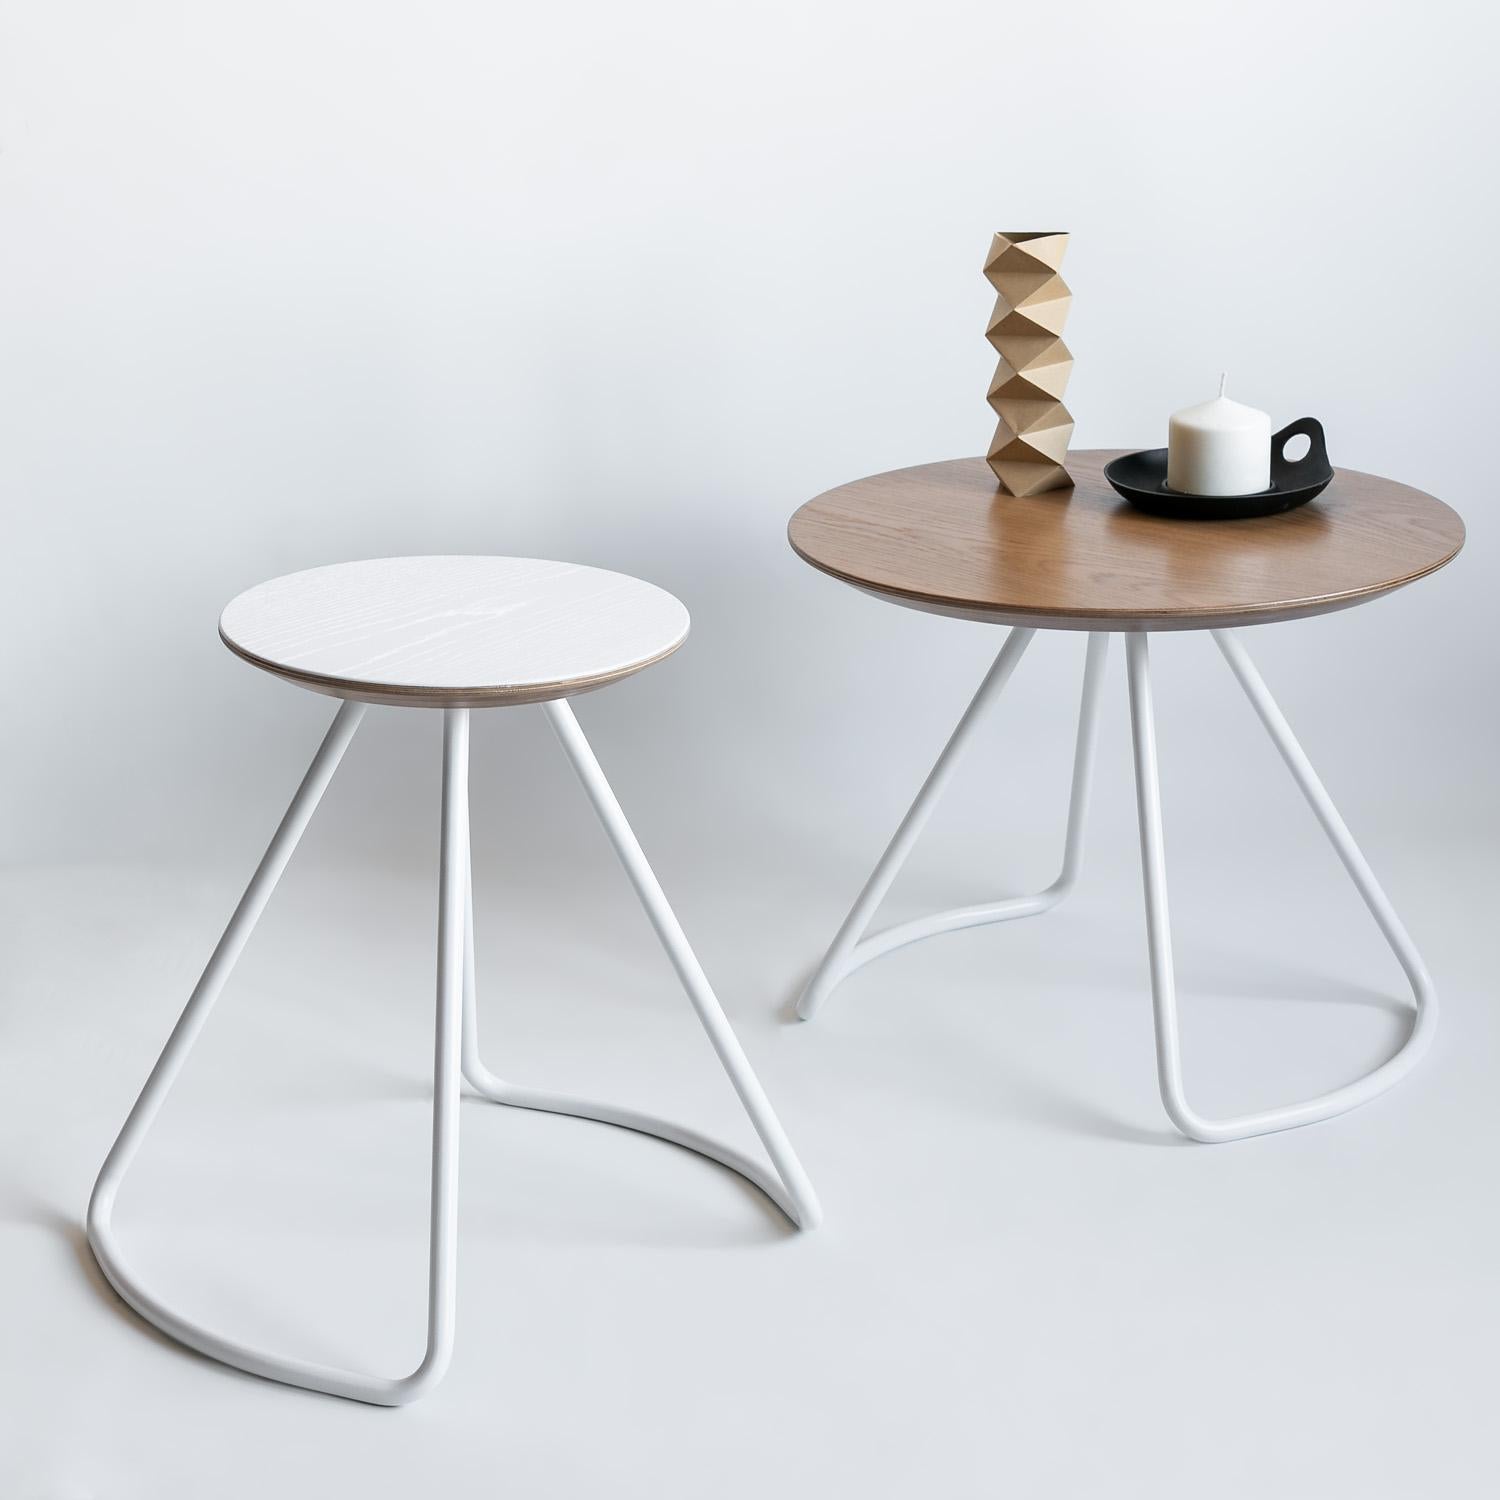 Sama stool/table is part of the Sama collection, which provides functionality through simple, yet striking and sculptural forms that add a unique and elegant touch to its environment.

Inspired by the poetry of whirling costumes worn in Sama